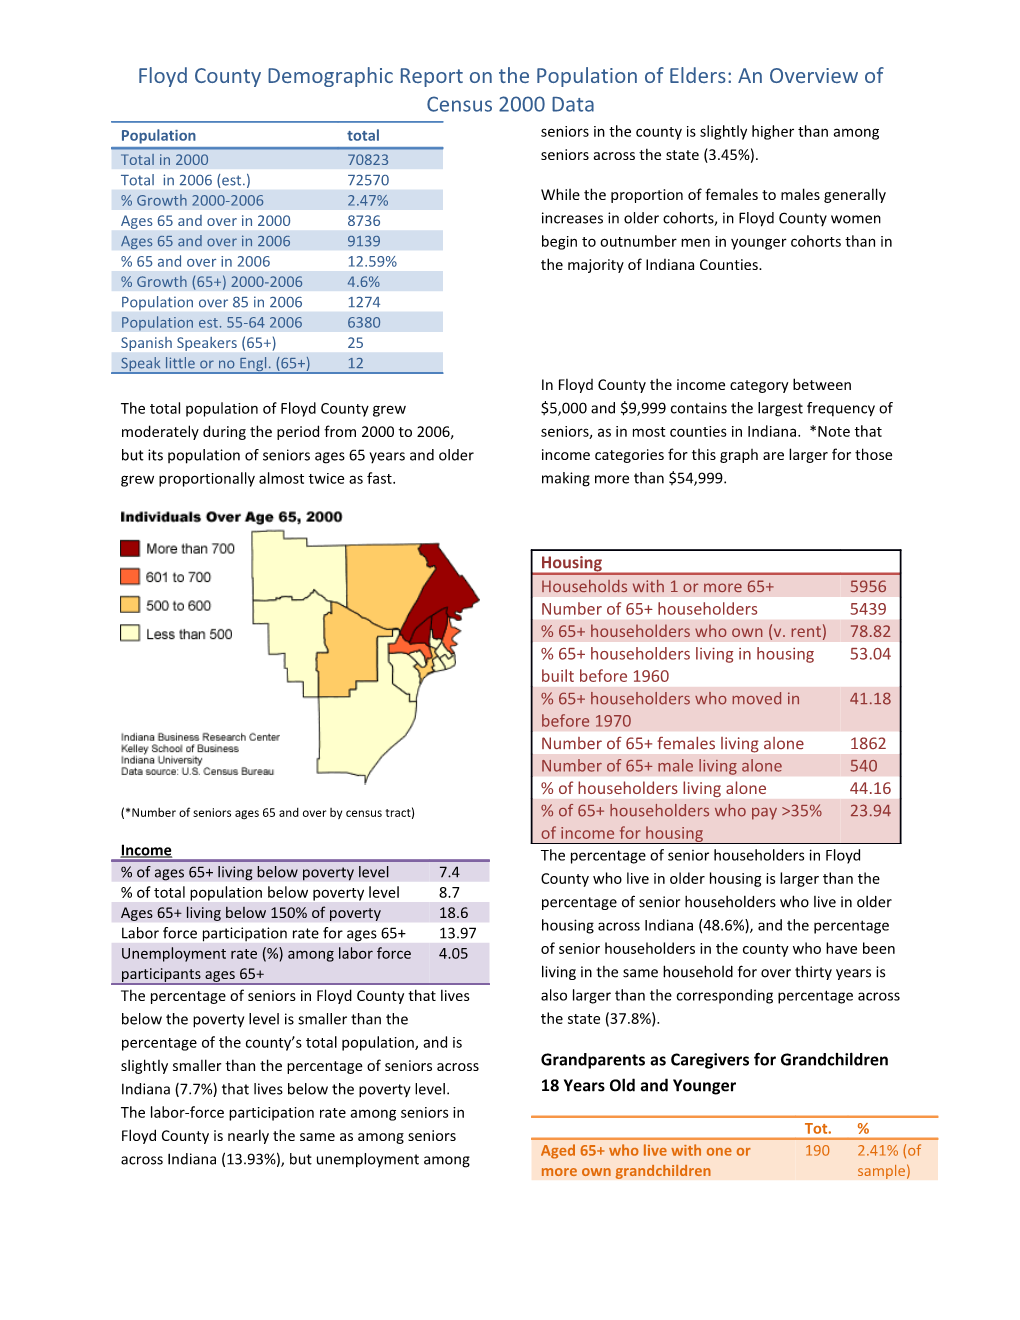 Floyd County Demographic Report on the Population of Elders: an Overview of Census 2000 Data